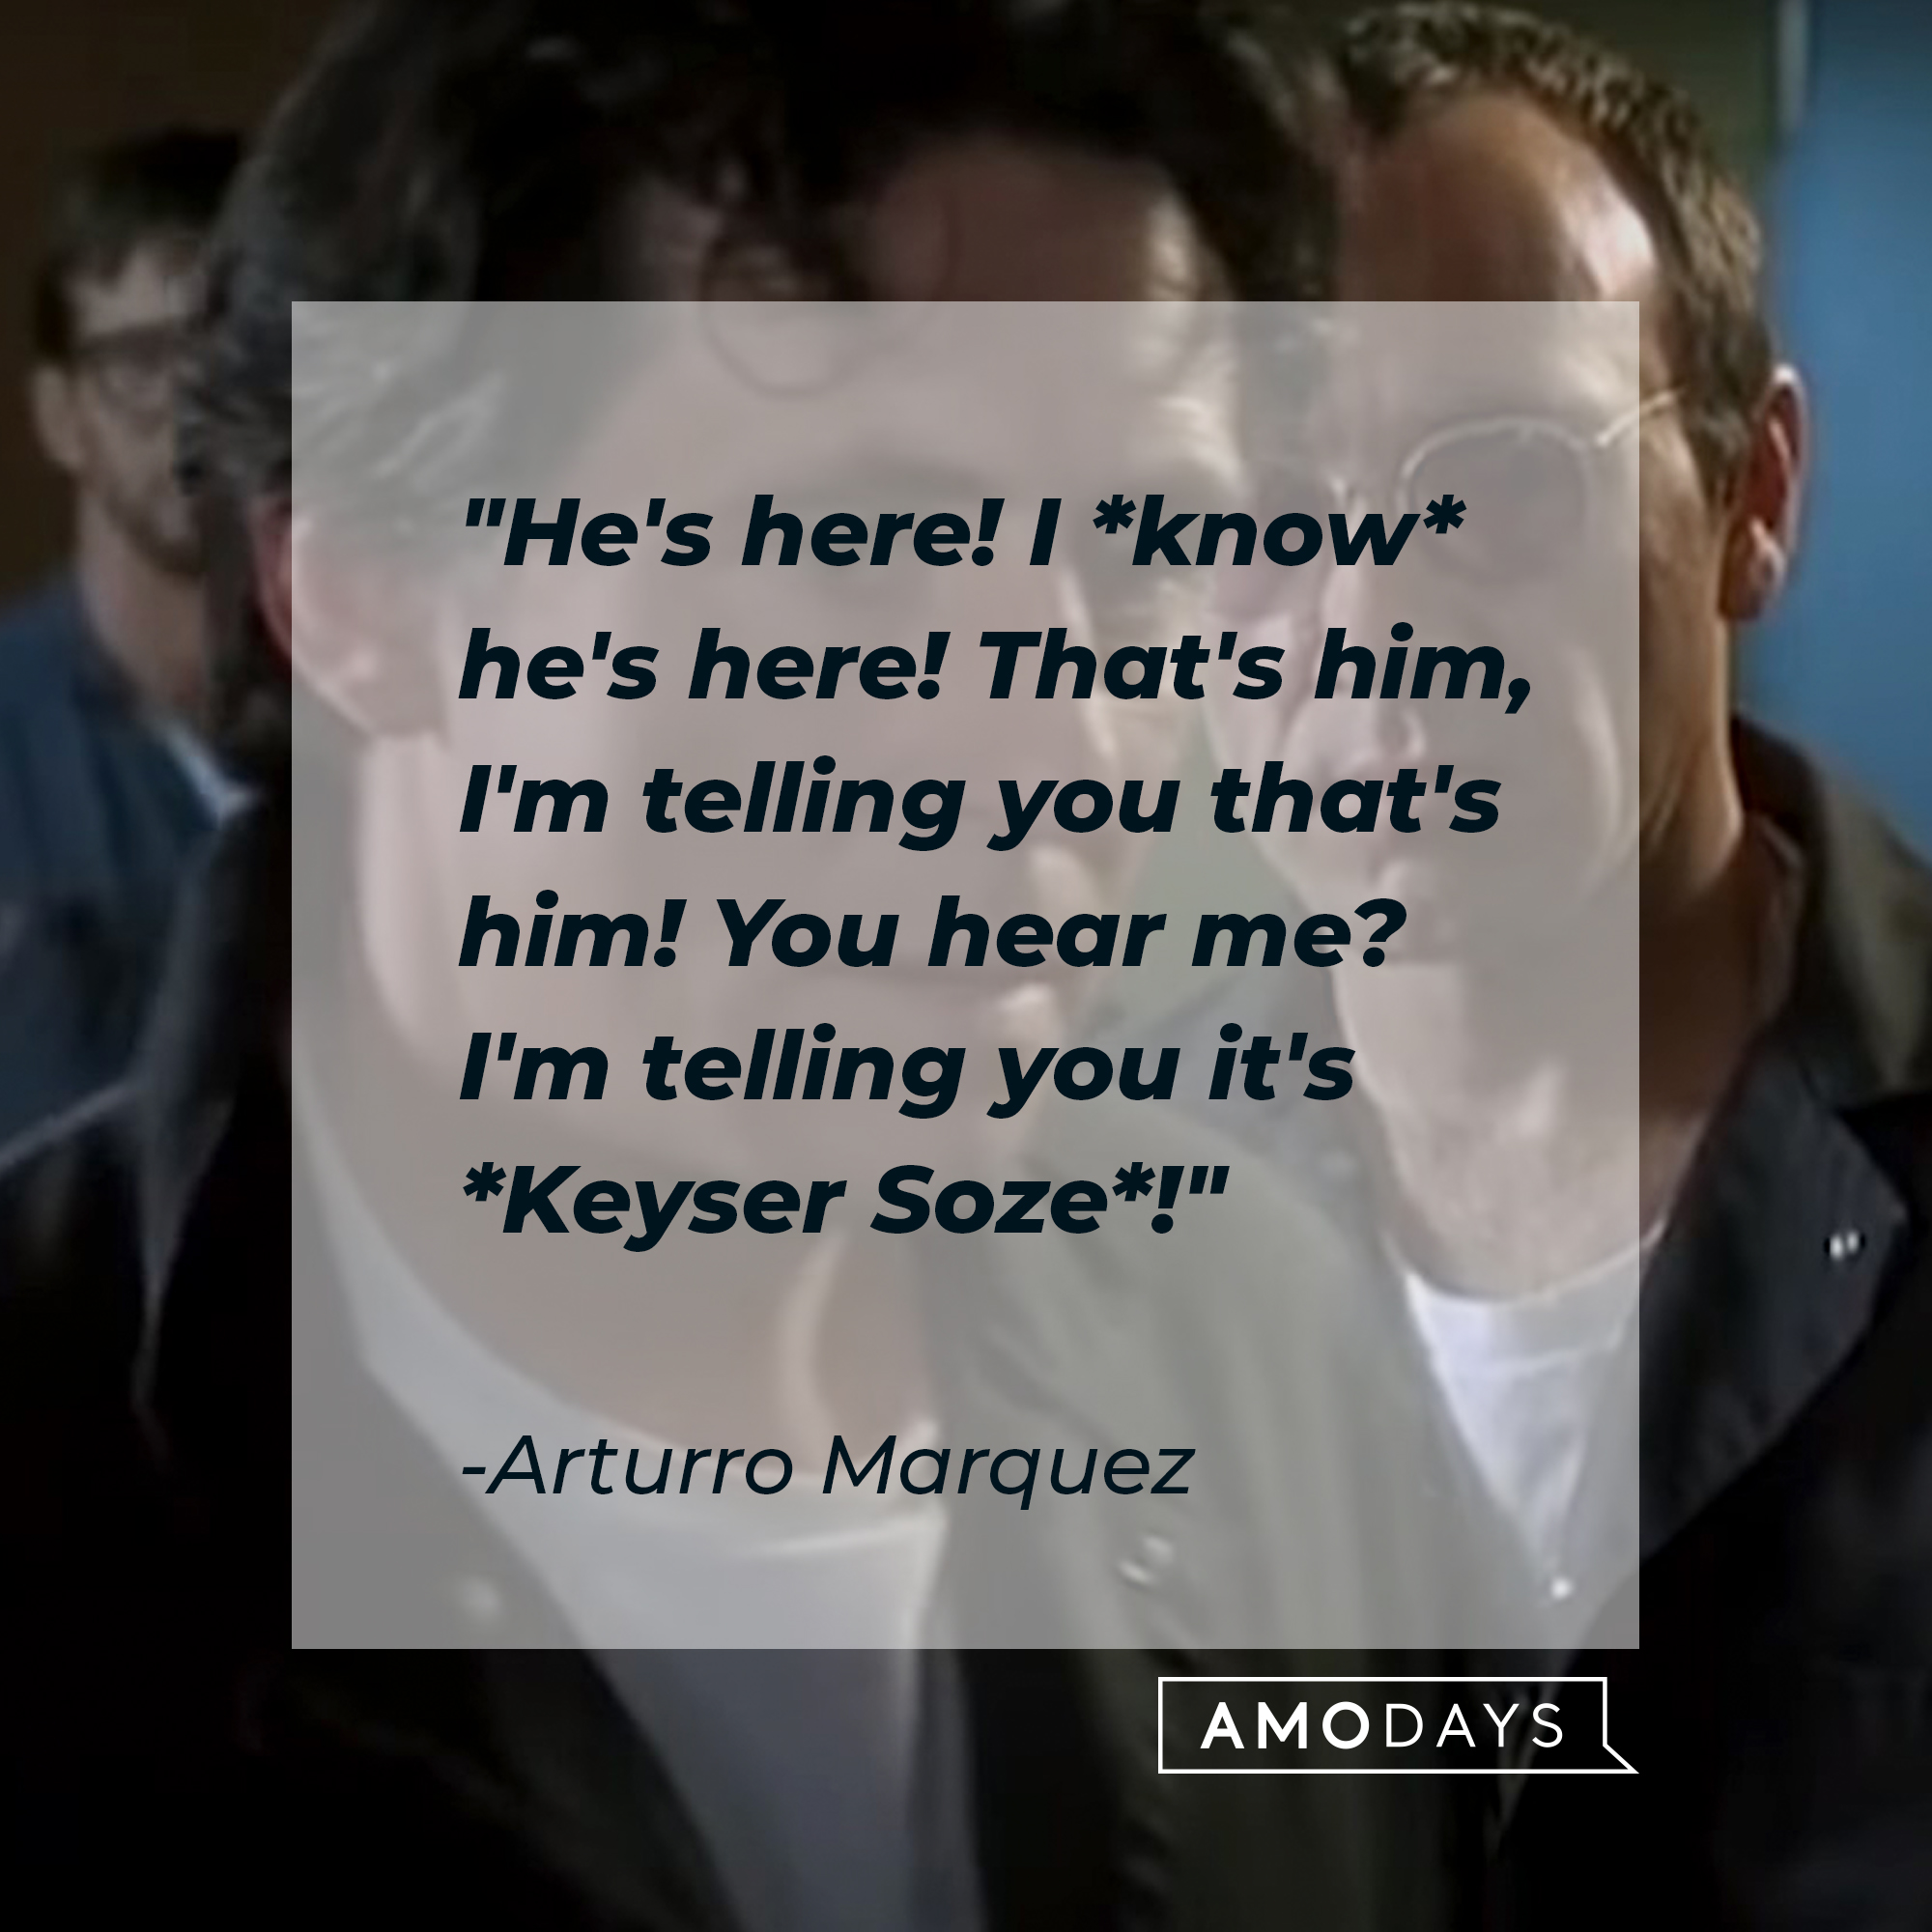 Arturro Marquez's quote: "He's here! I *know* he's here! That's him, I'm telling you that's him! You hear me? I'm telling you it's *Keyser Soze*!" | Source: facebook.com/usualsuspectsmovie